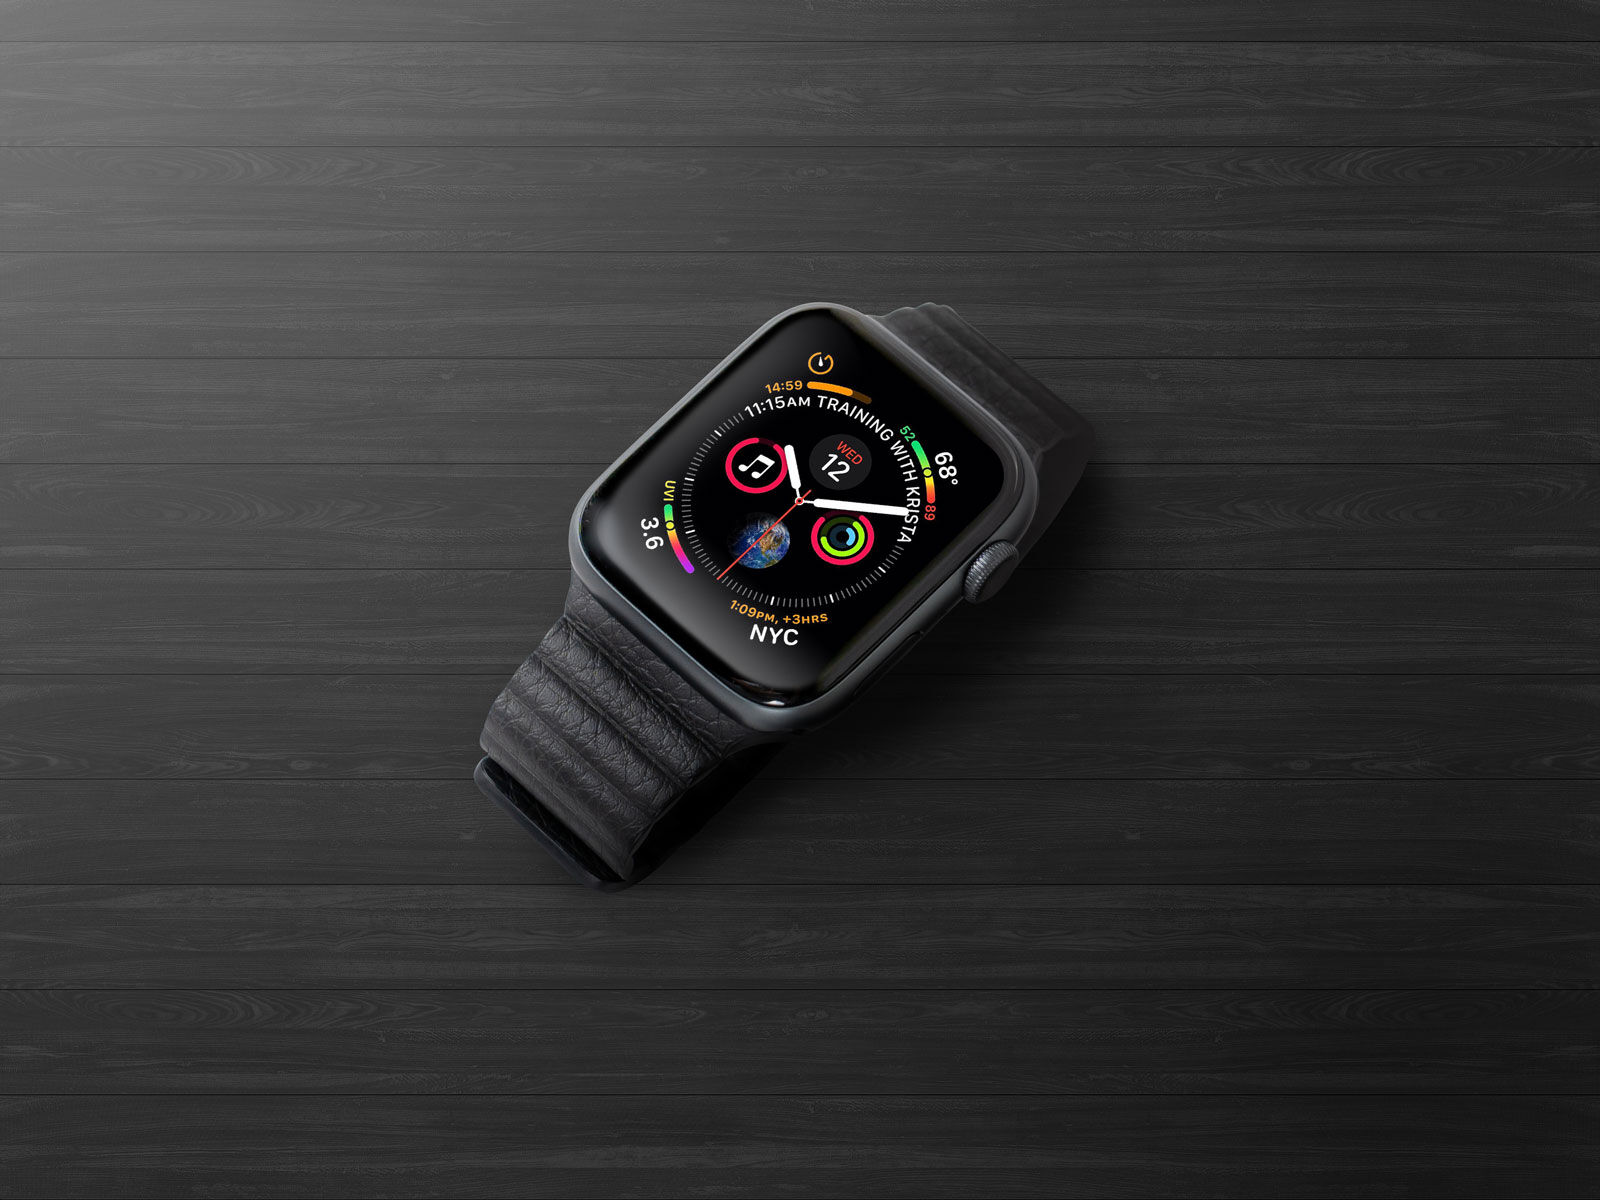 Mockup Featuring Top View of an Apple Watch FREE PSD